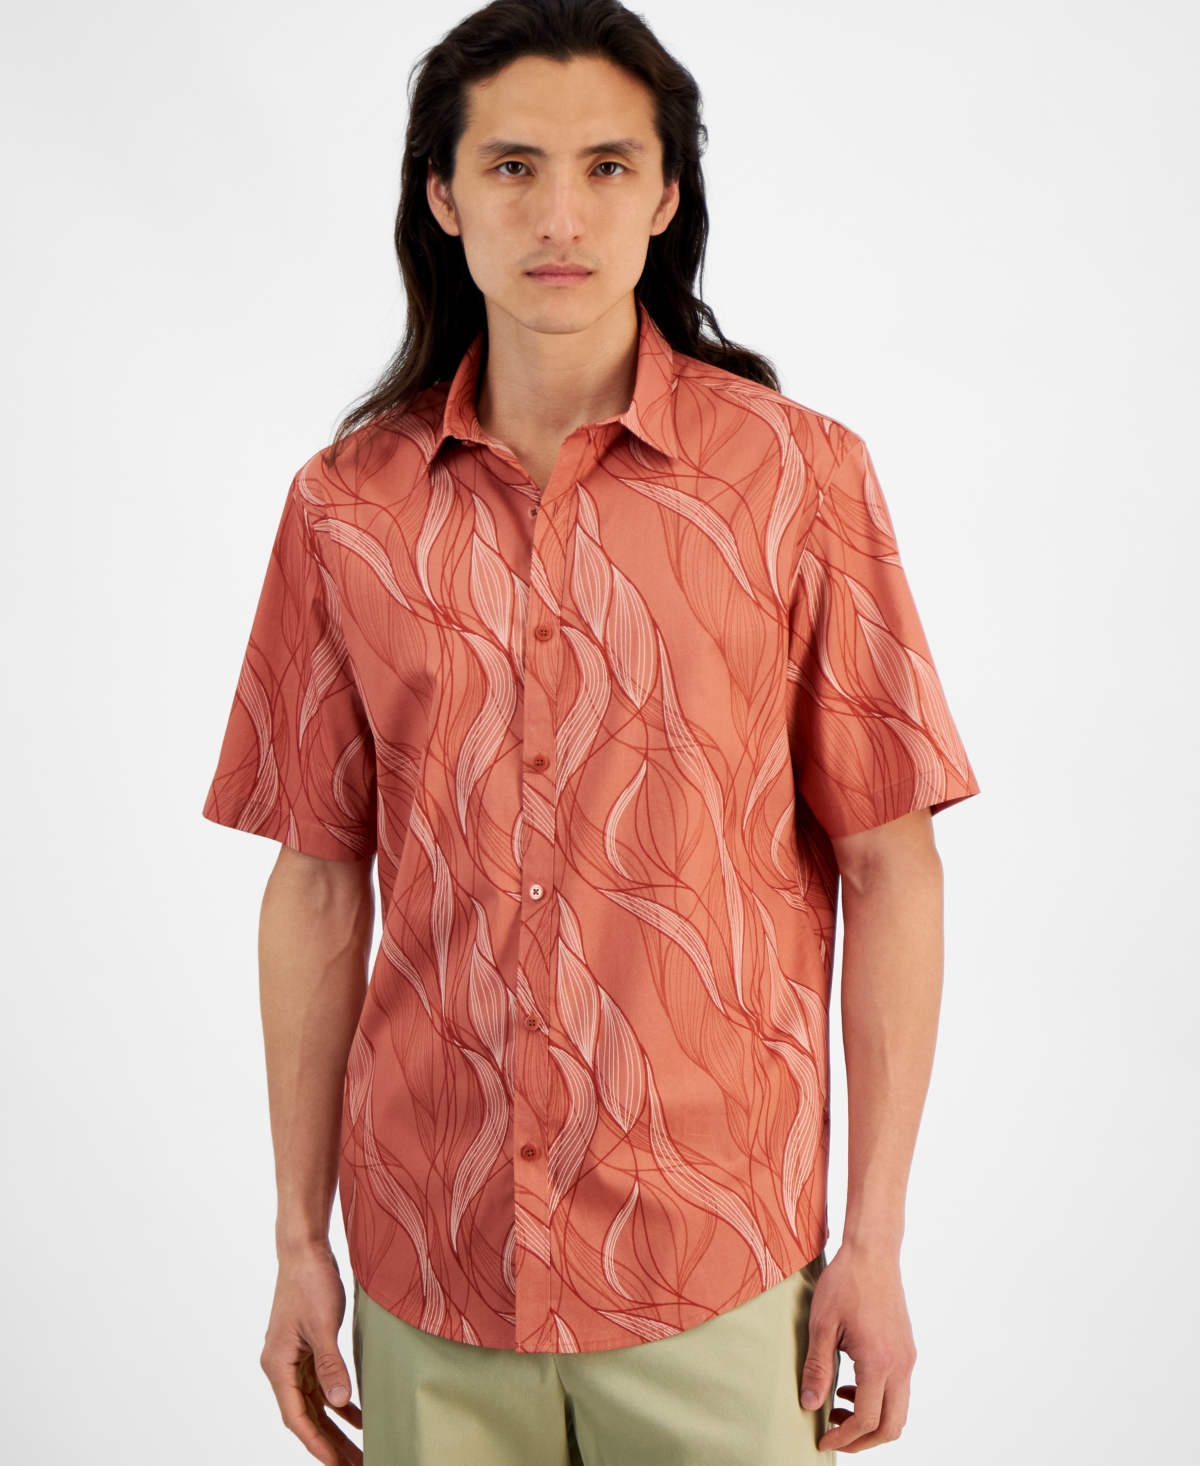 Men's Regular-Fit Stretch Abstract Wave-Print Button-Down Poplin Shirt, Created for Macy's - Terracotta Glaze